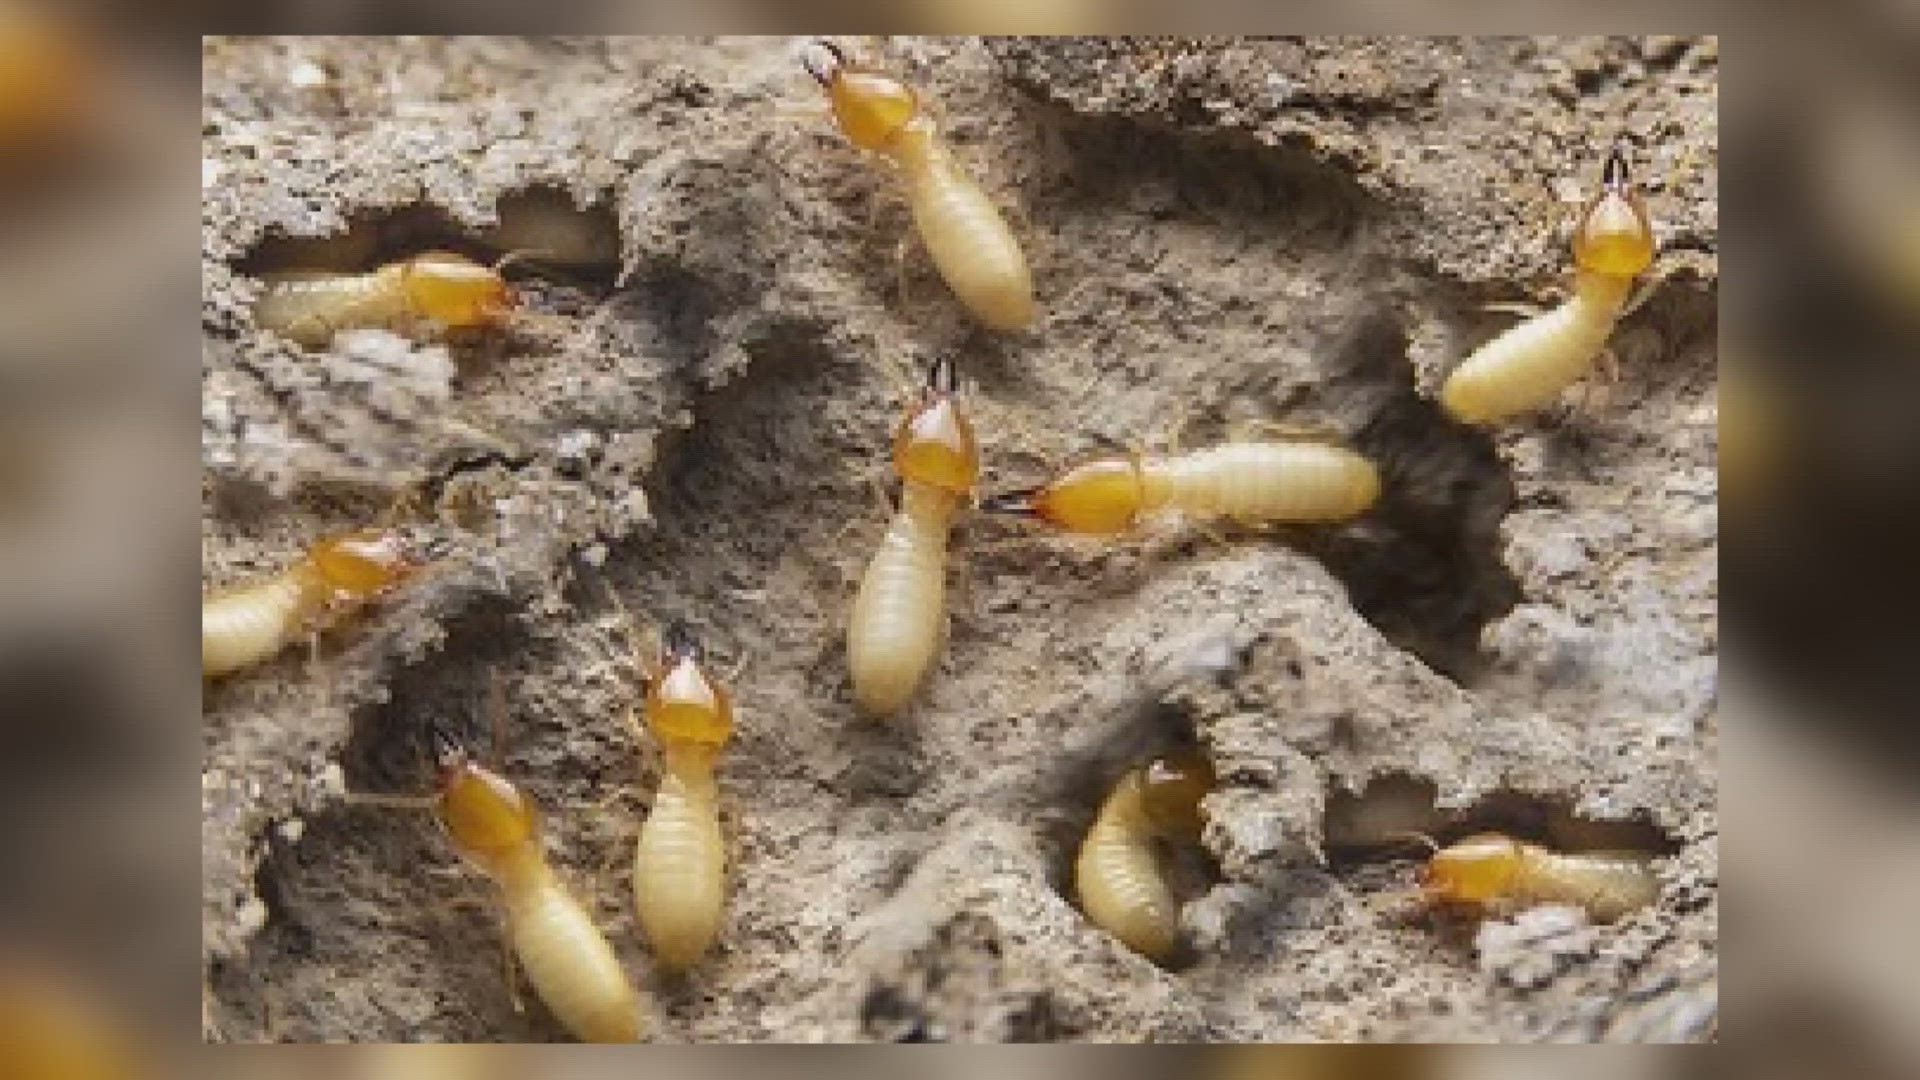 Termite swarming is a form of reproduction for termites. A male and a female termite will break away from their colony to try and form a new one.